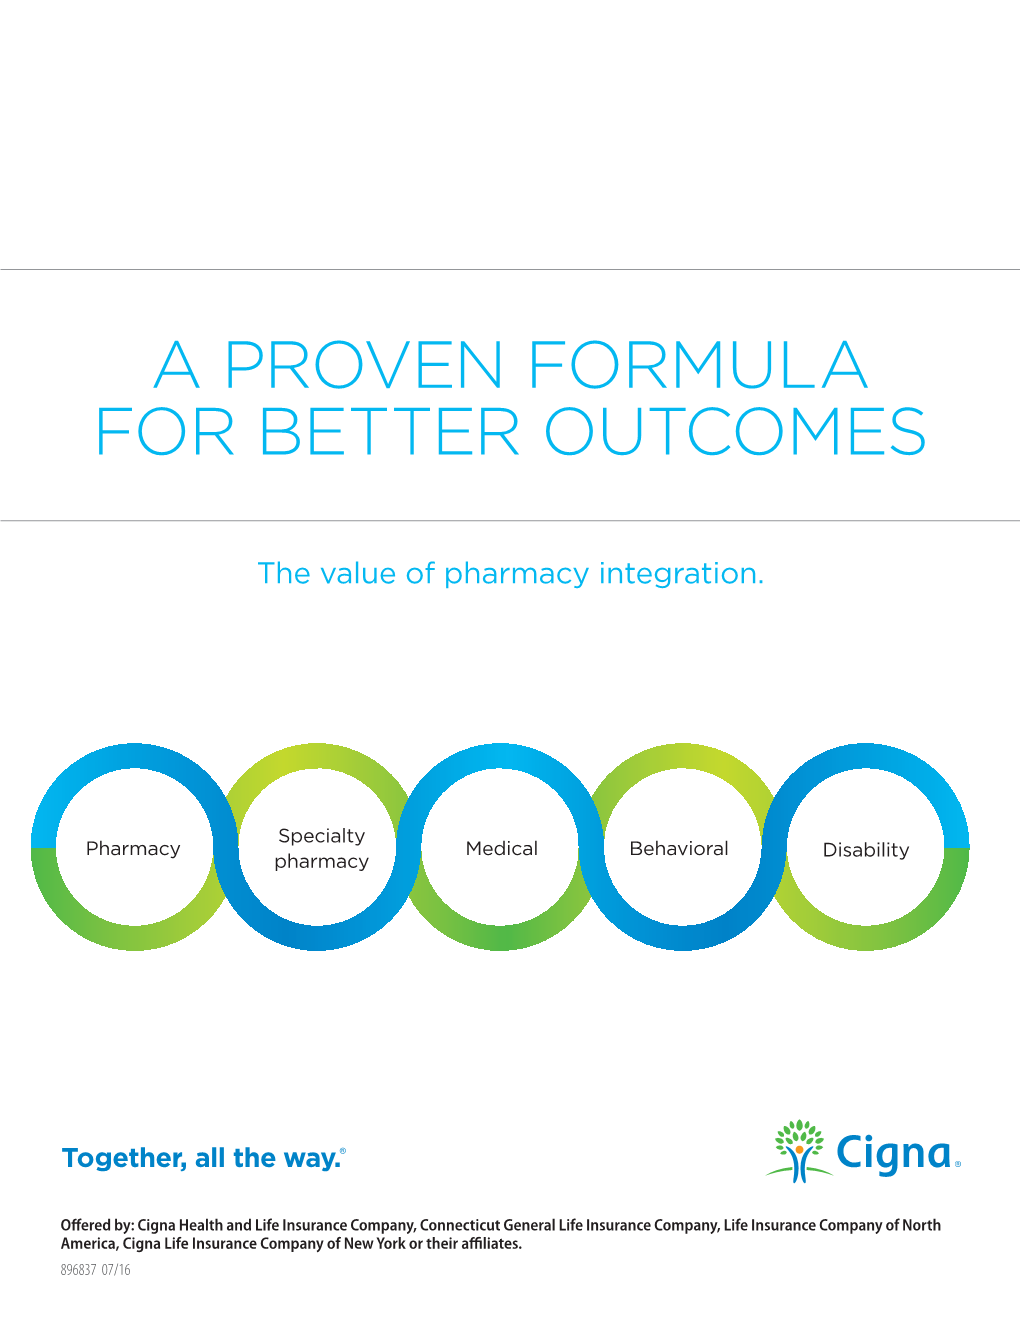 A Proven Formula for Better Outcomes